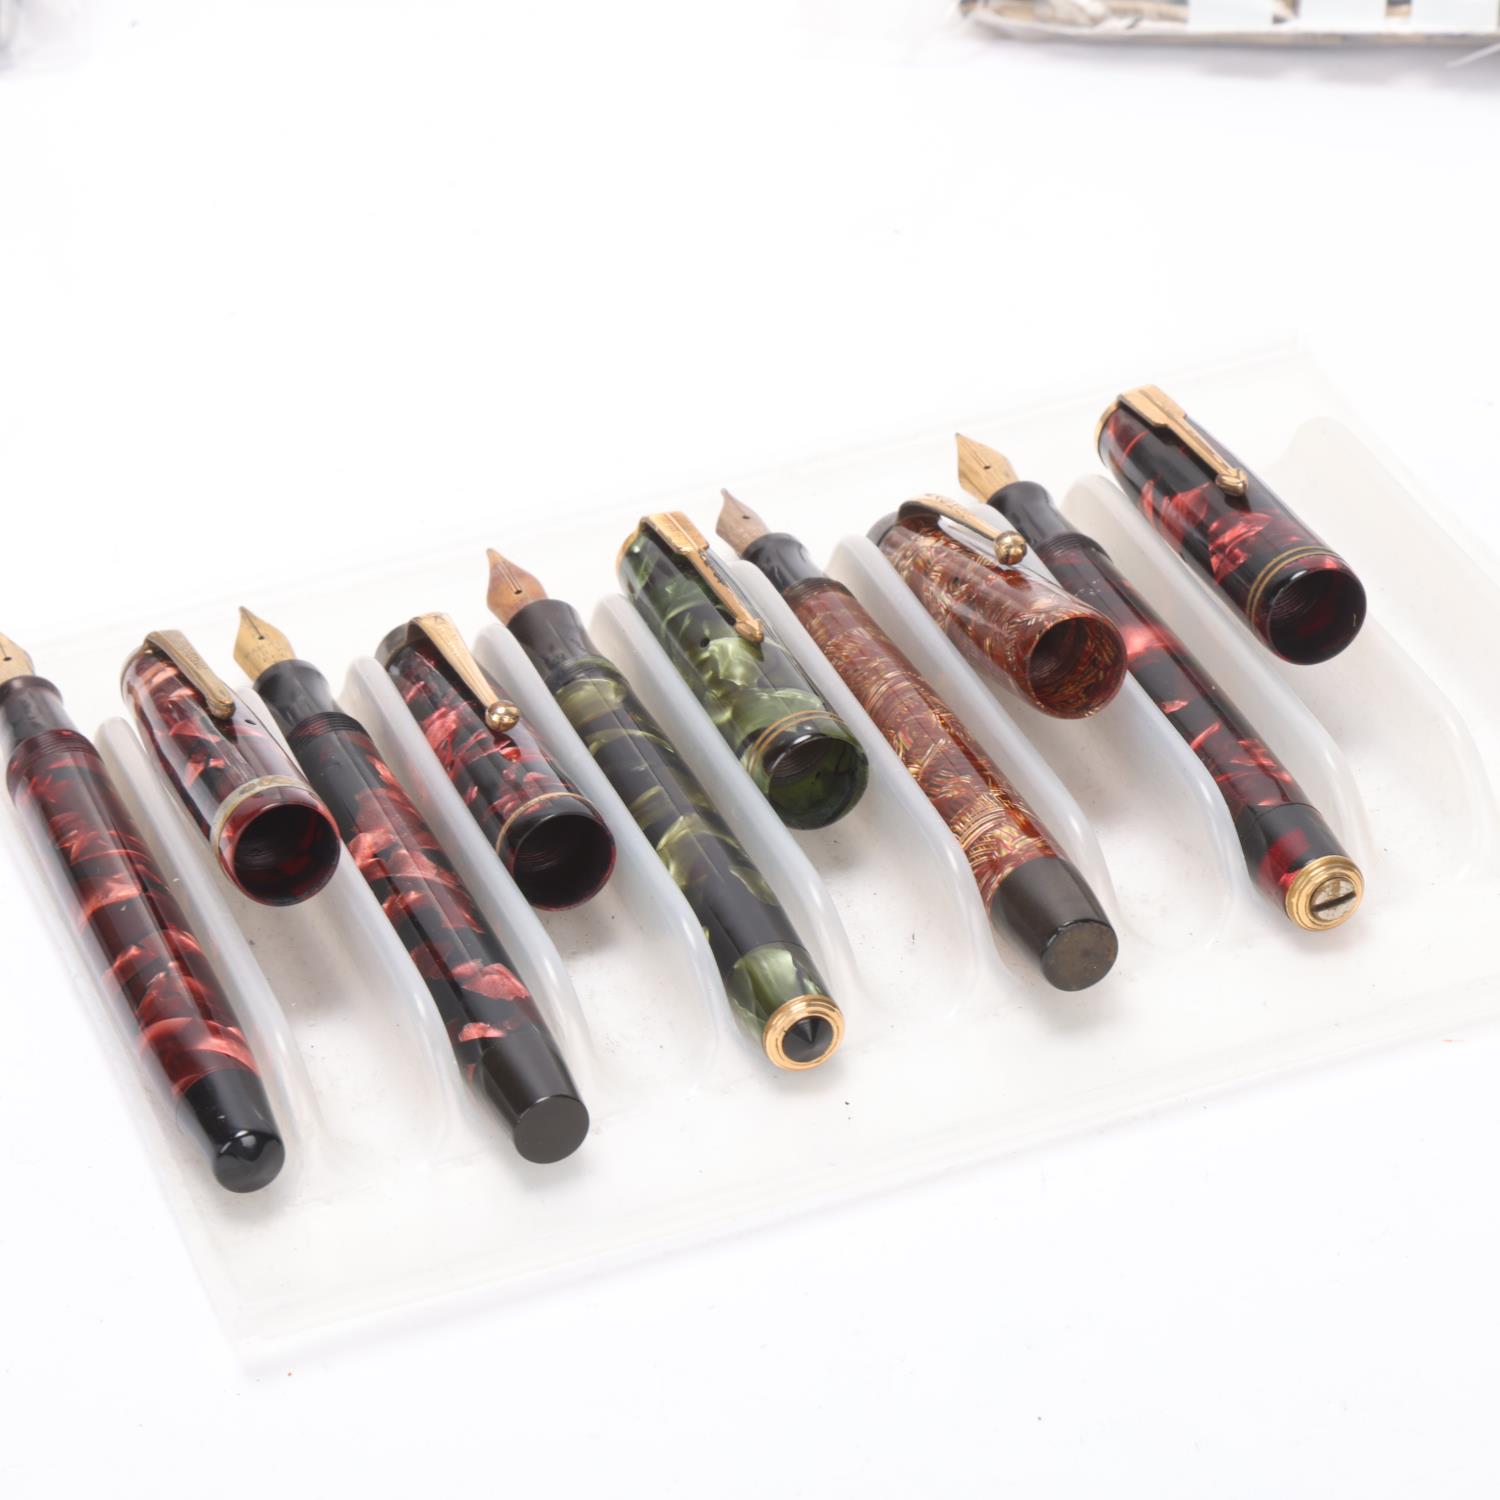 5 vintage Parker fountain pens, with marbled resin bodies lever and sprung pump "Vacumatic" fill, - Image 4 of 4